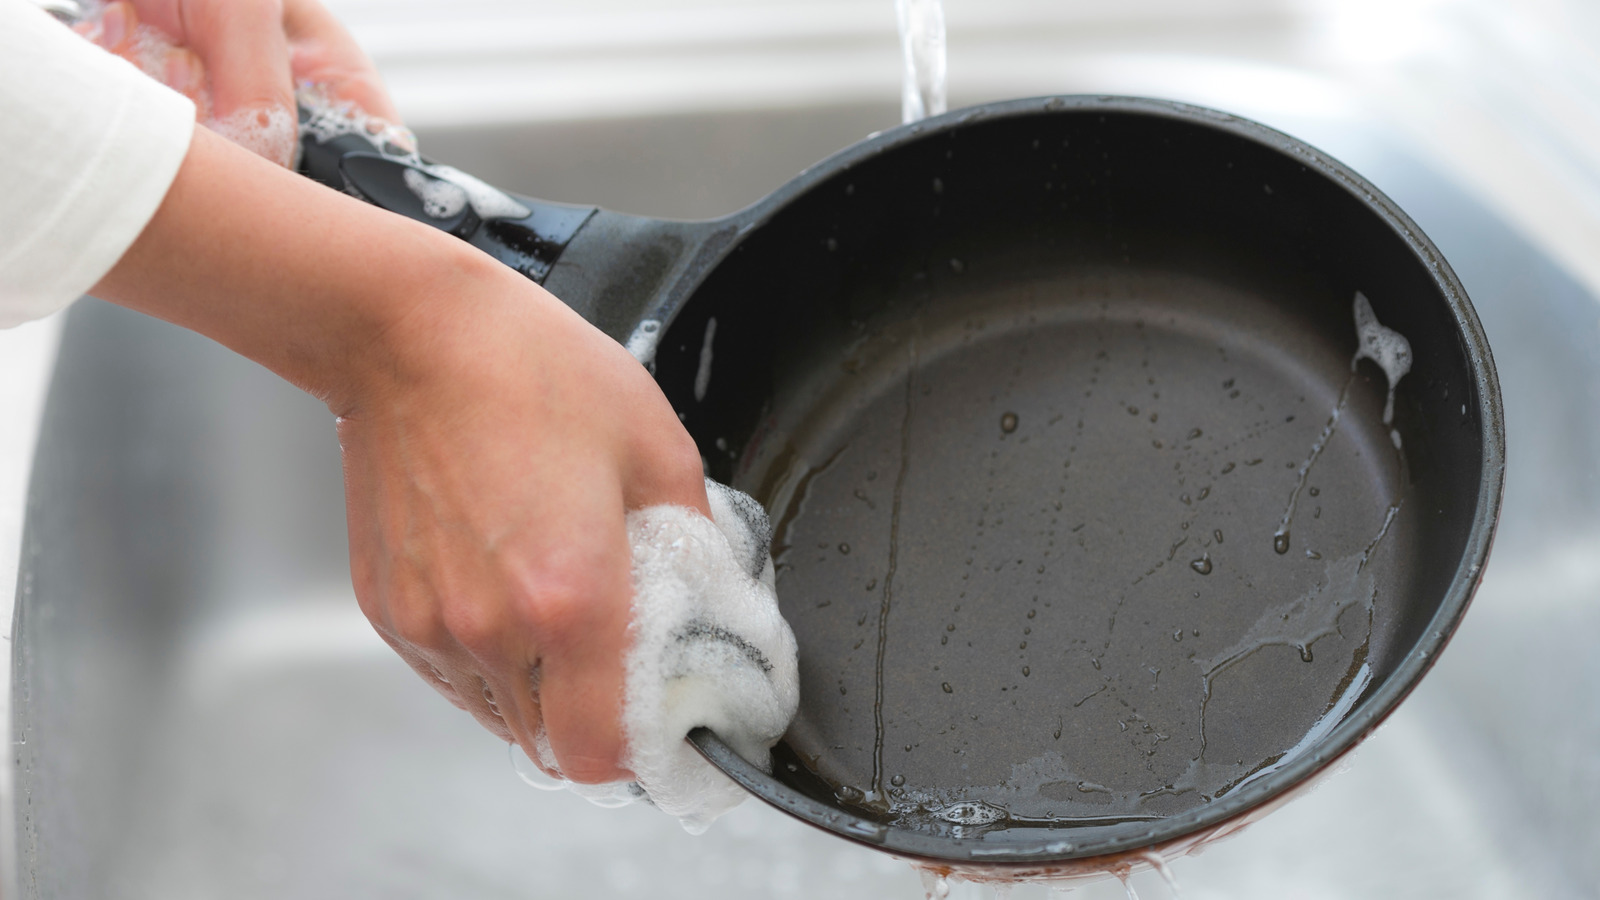 How to Clean a Dirty Nonstick Ceramic Pan